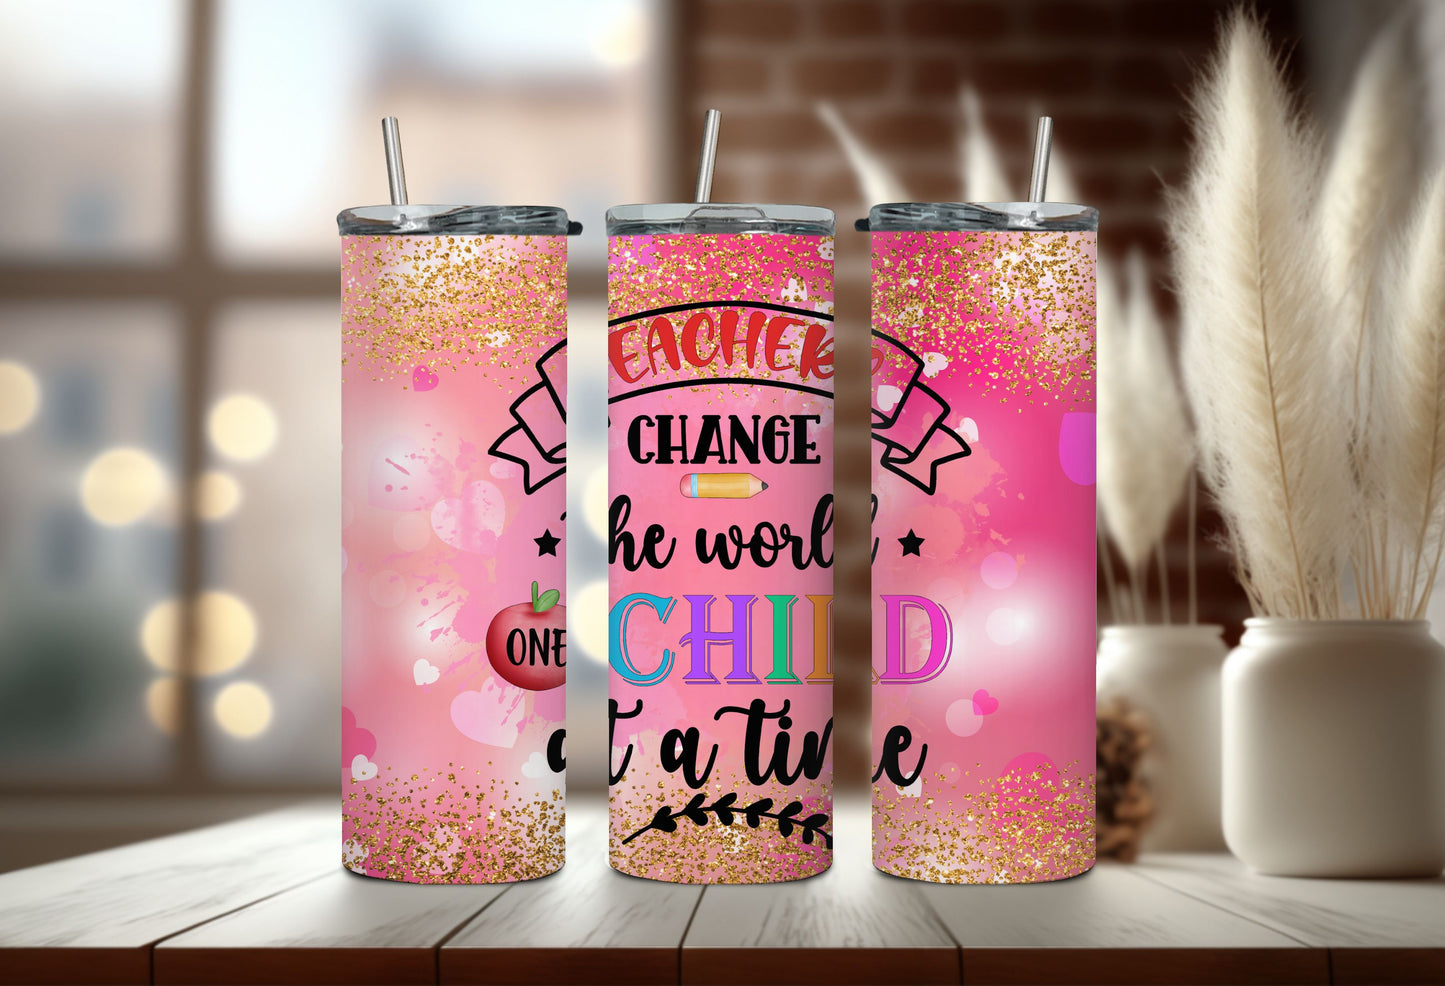 20 oz. Stainless Teacher Tumblers - So many to choose from!